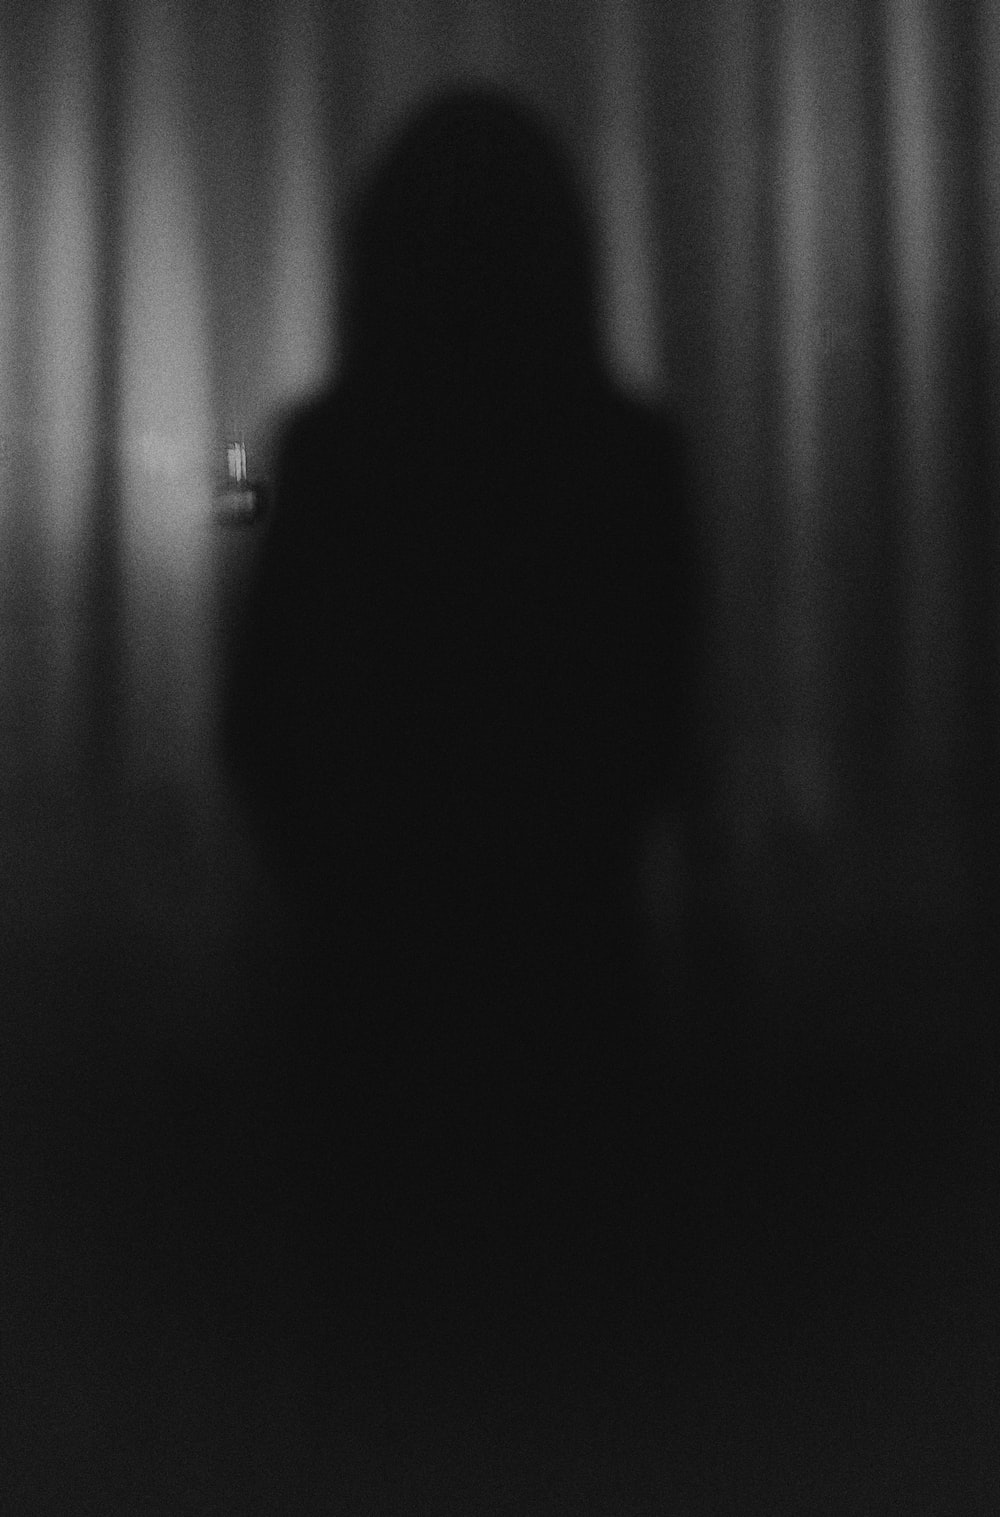 A person standing in front of curtains - Vampire